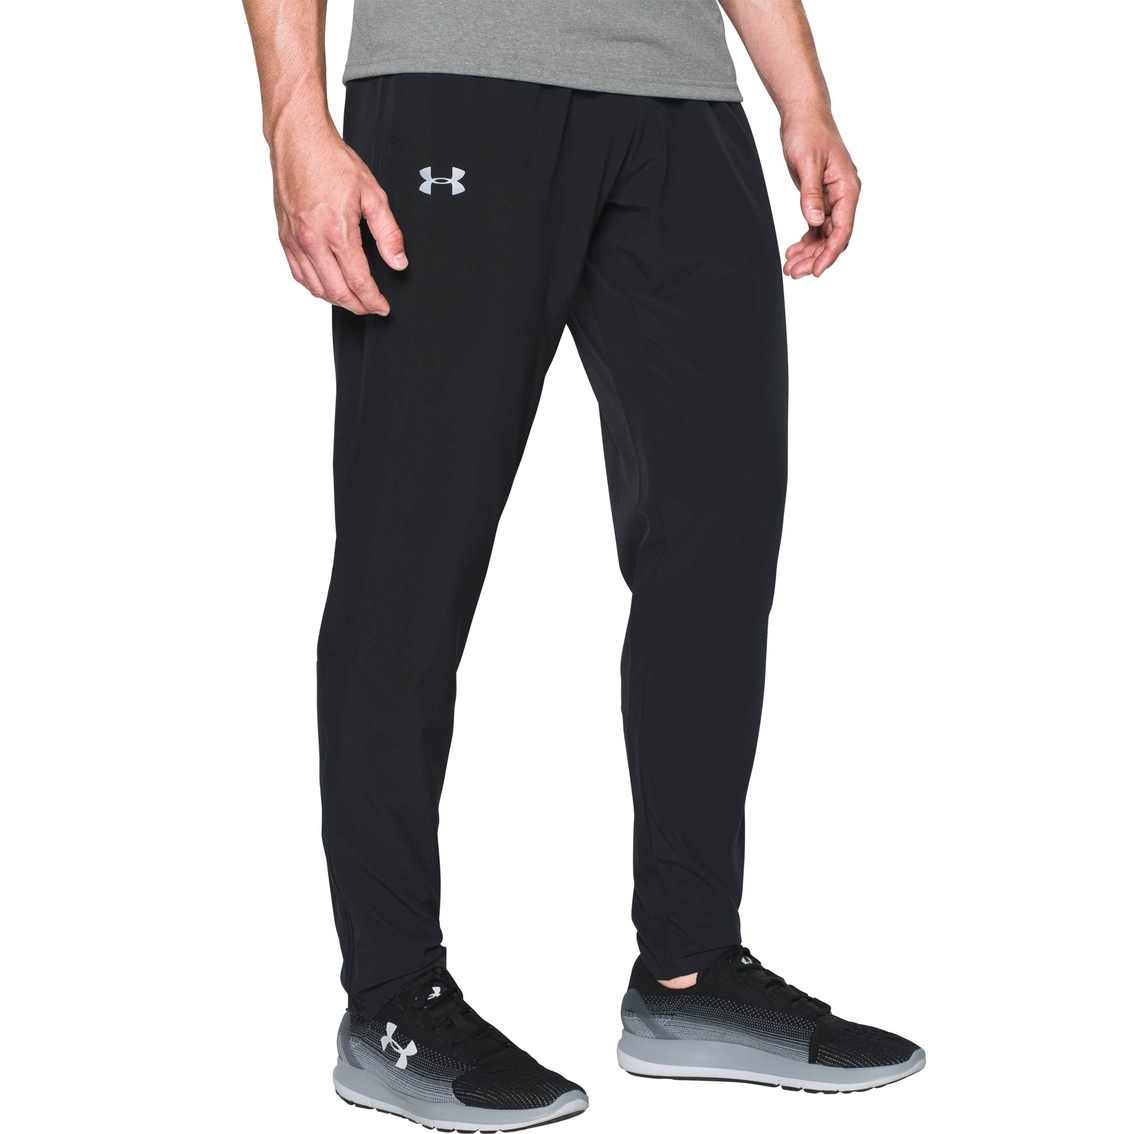 Exercise & Fitness Under Armour Mens No Breaks Stretch-Woven Run Pants ...